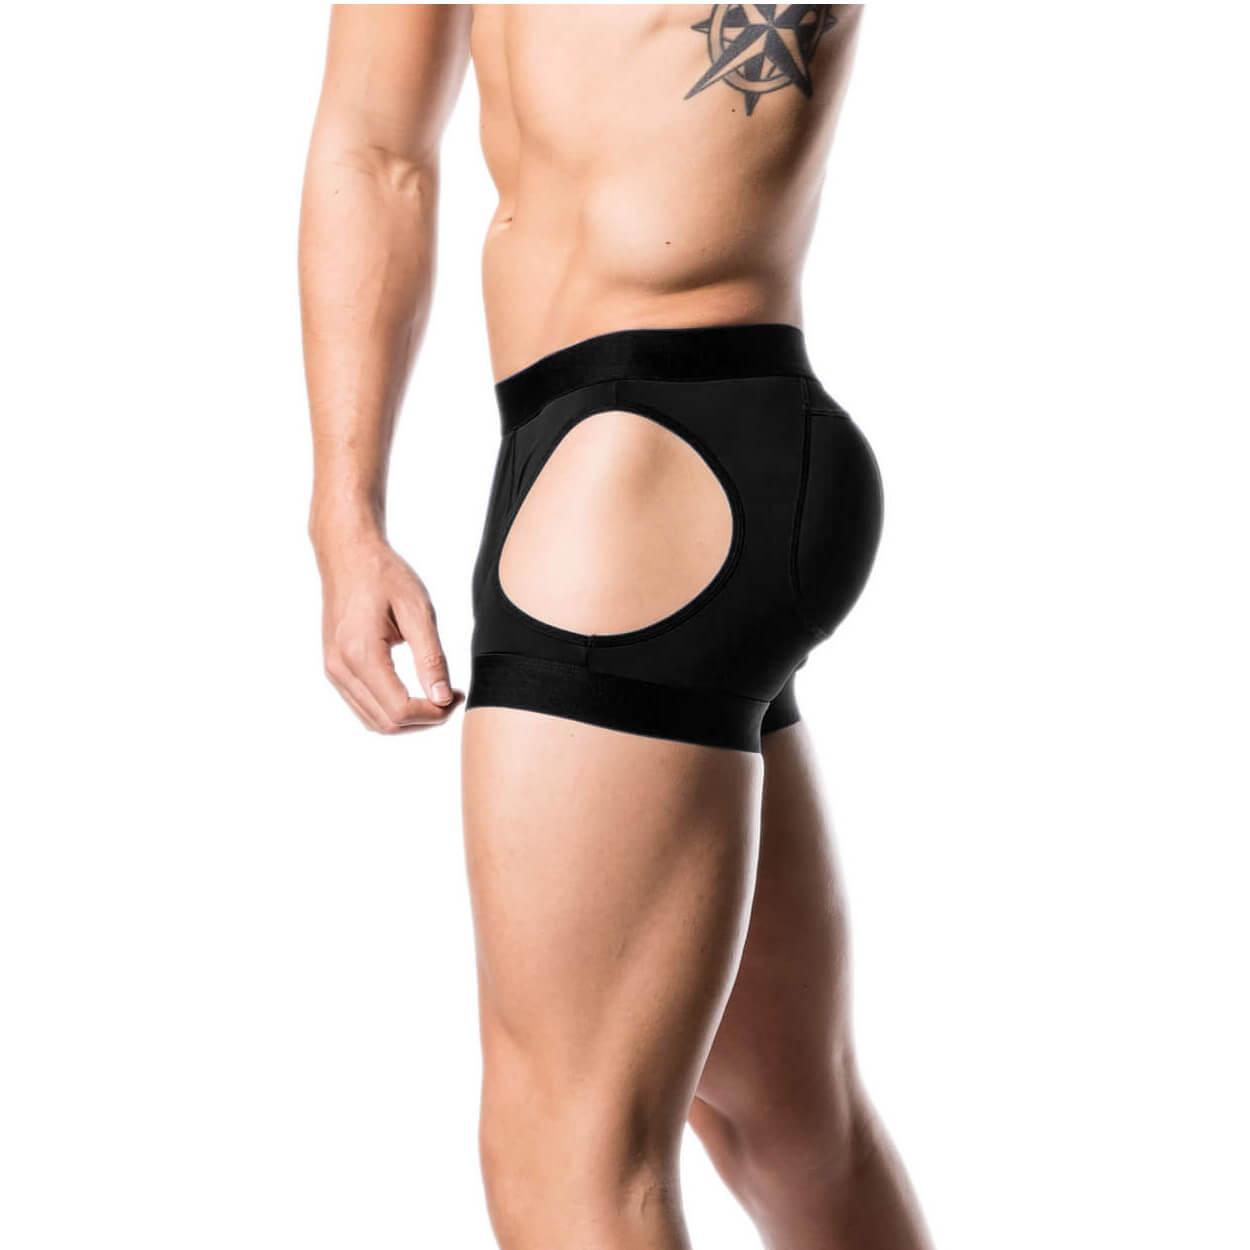 Mens Padded Underwear and Womens Butt Enhancers for Comfort and